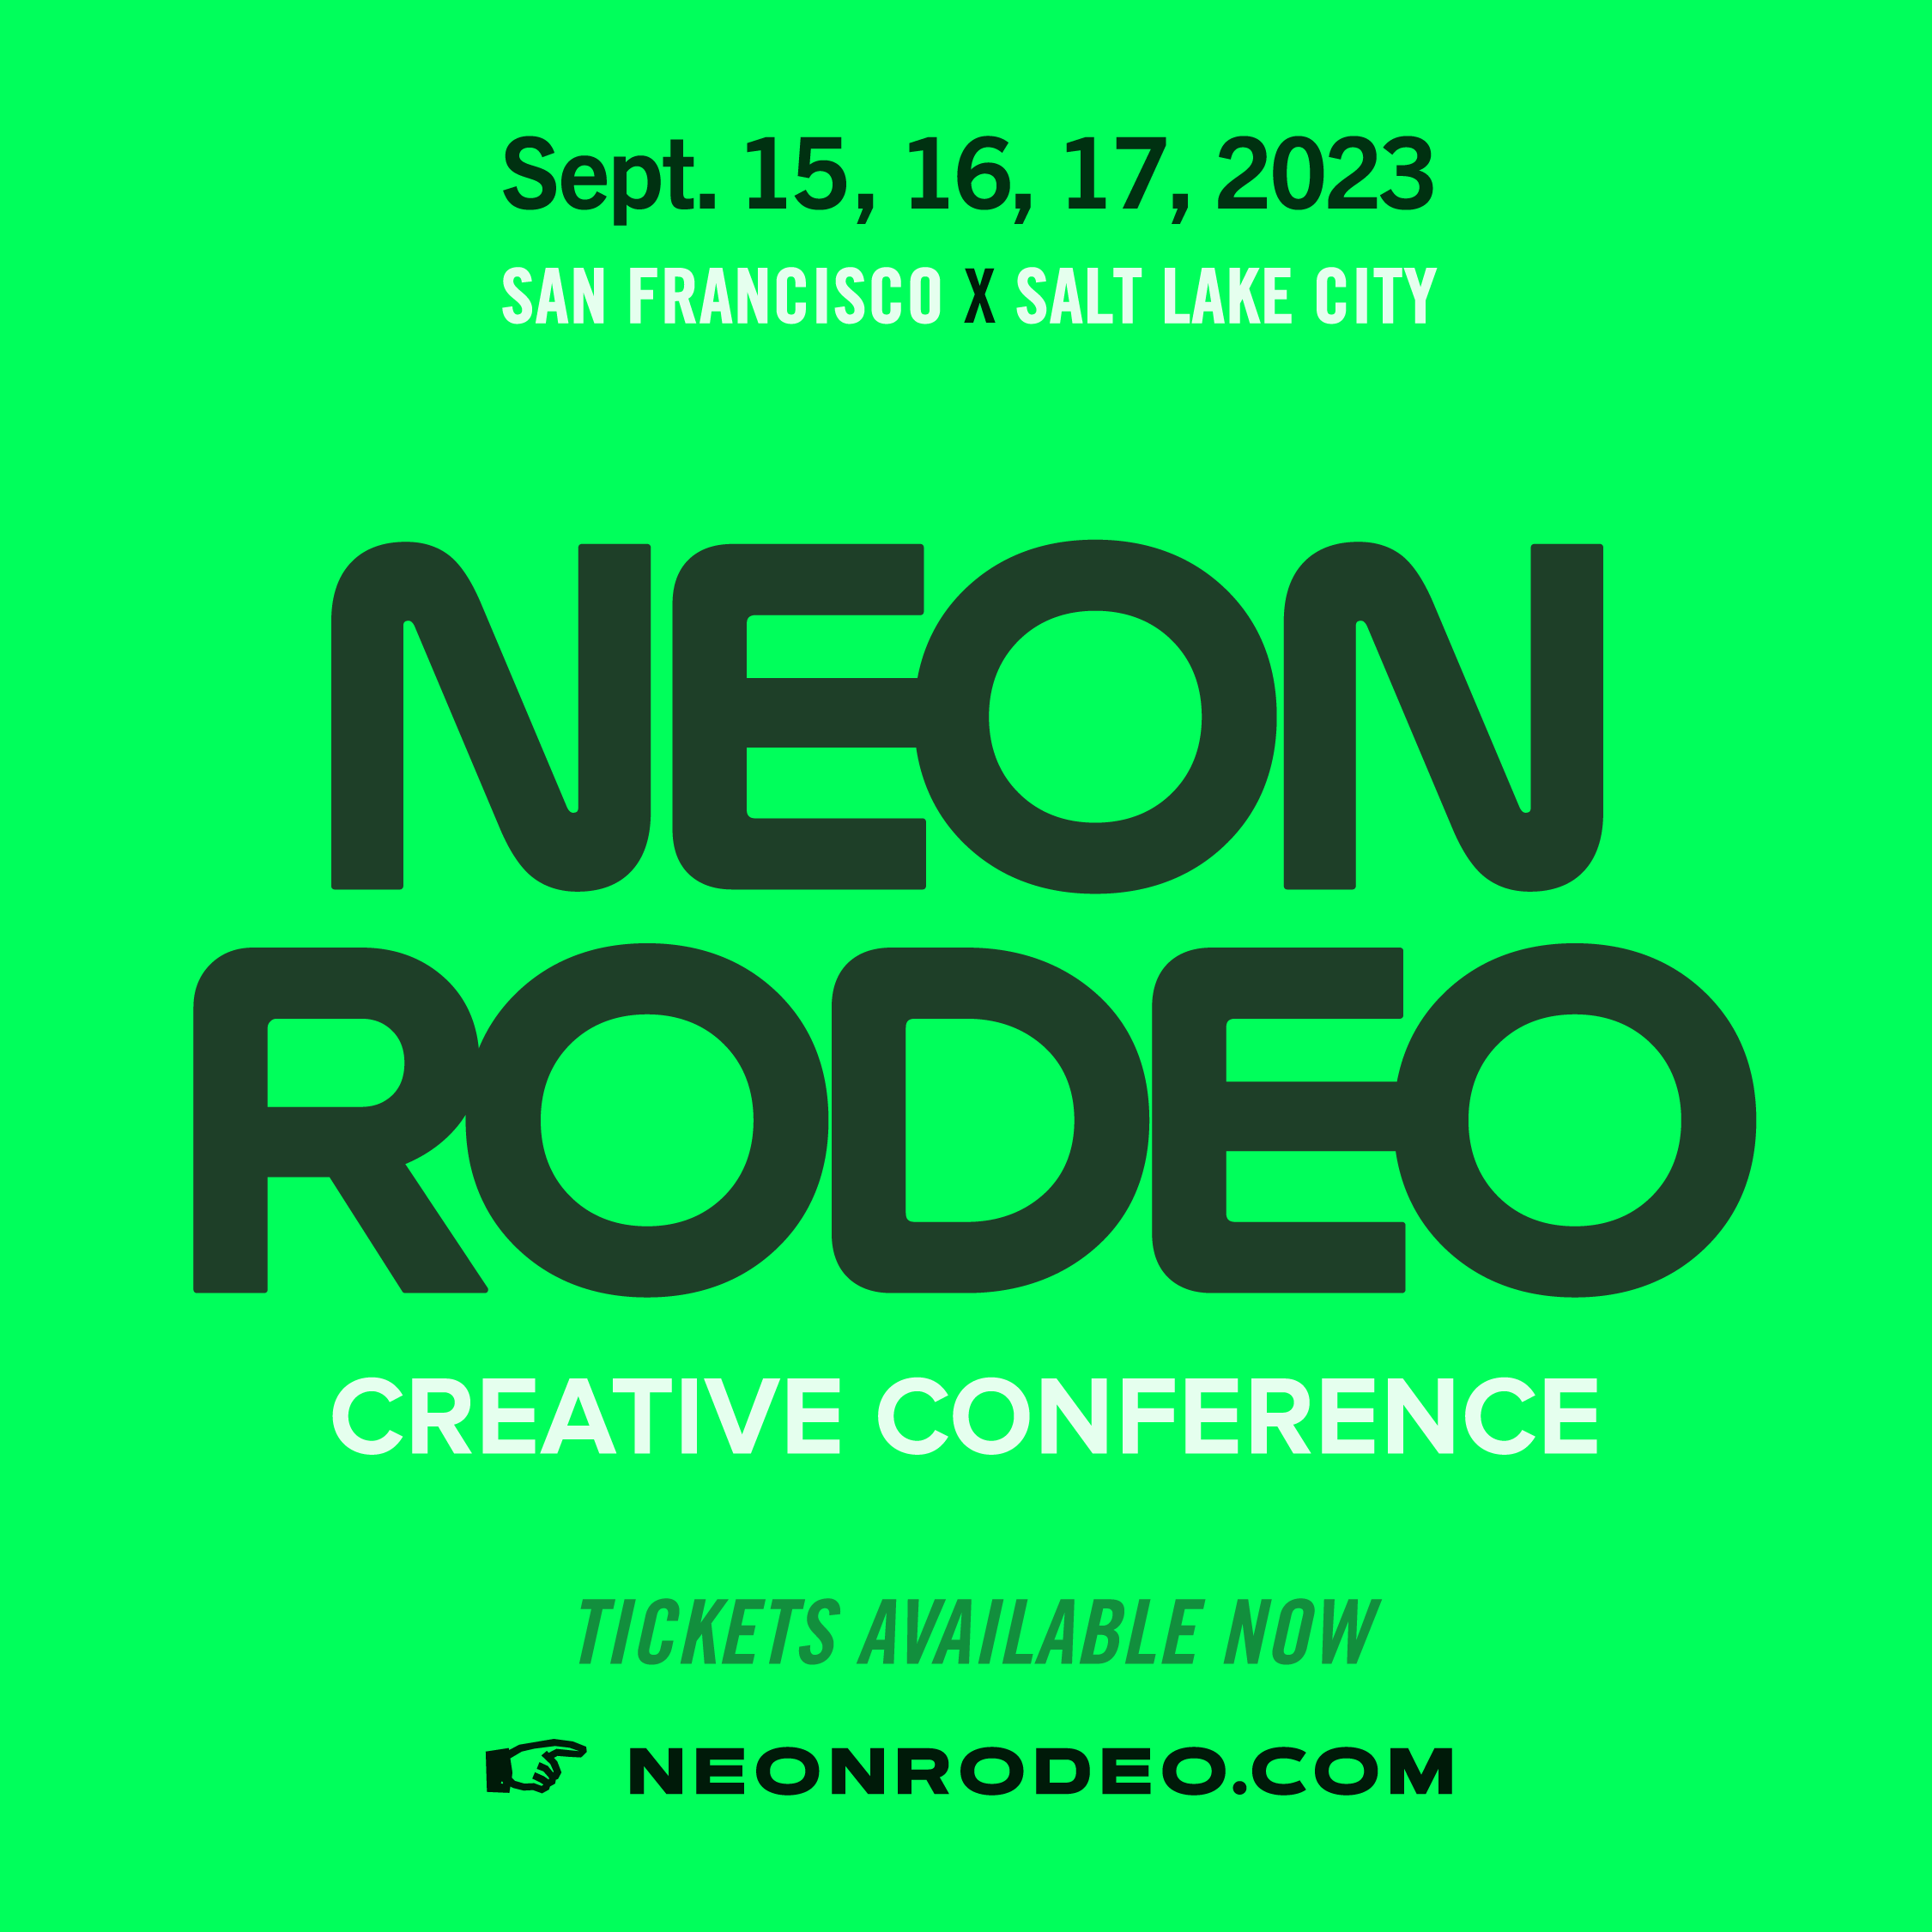 2023 Neon Rodeo Creative Conference - フライヤー表